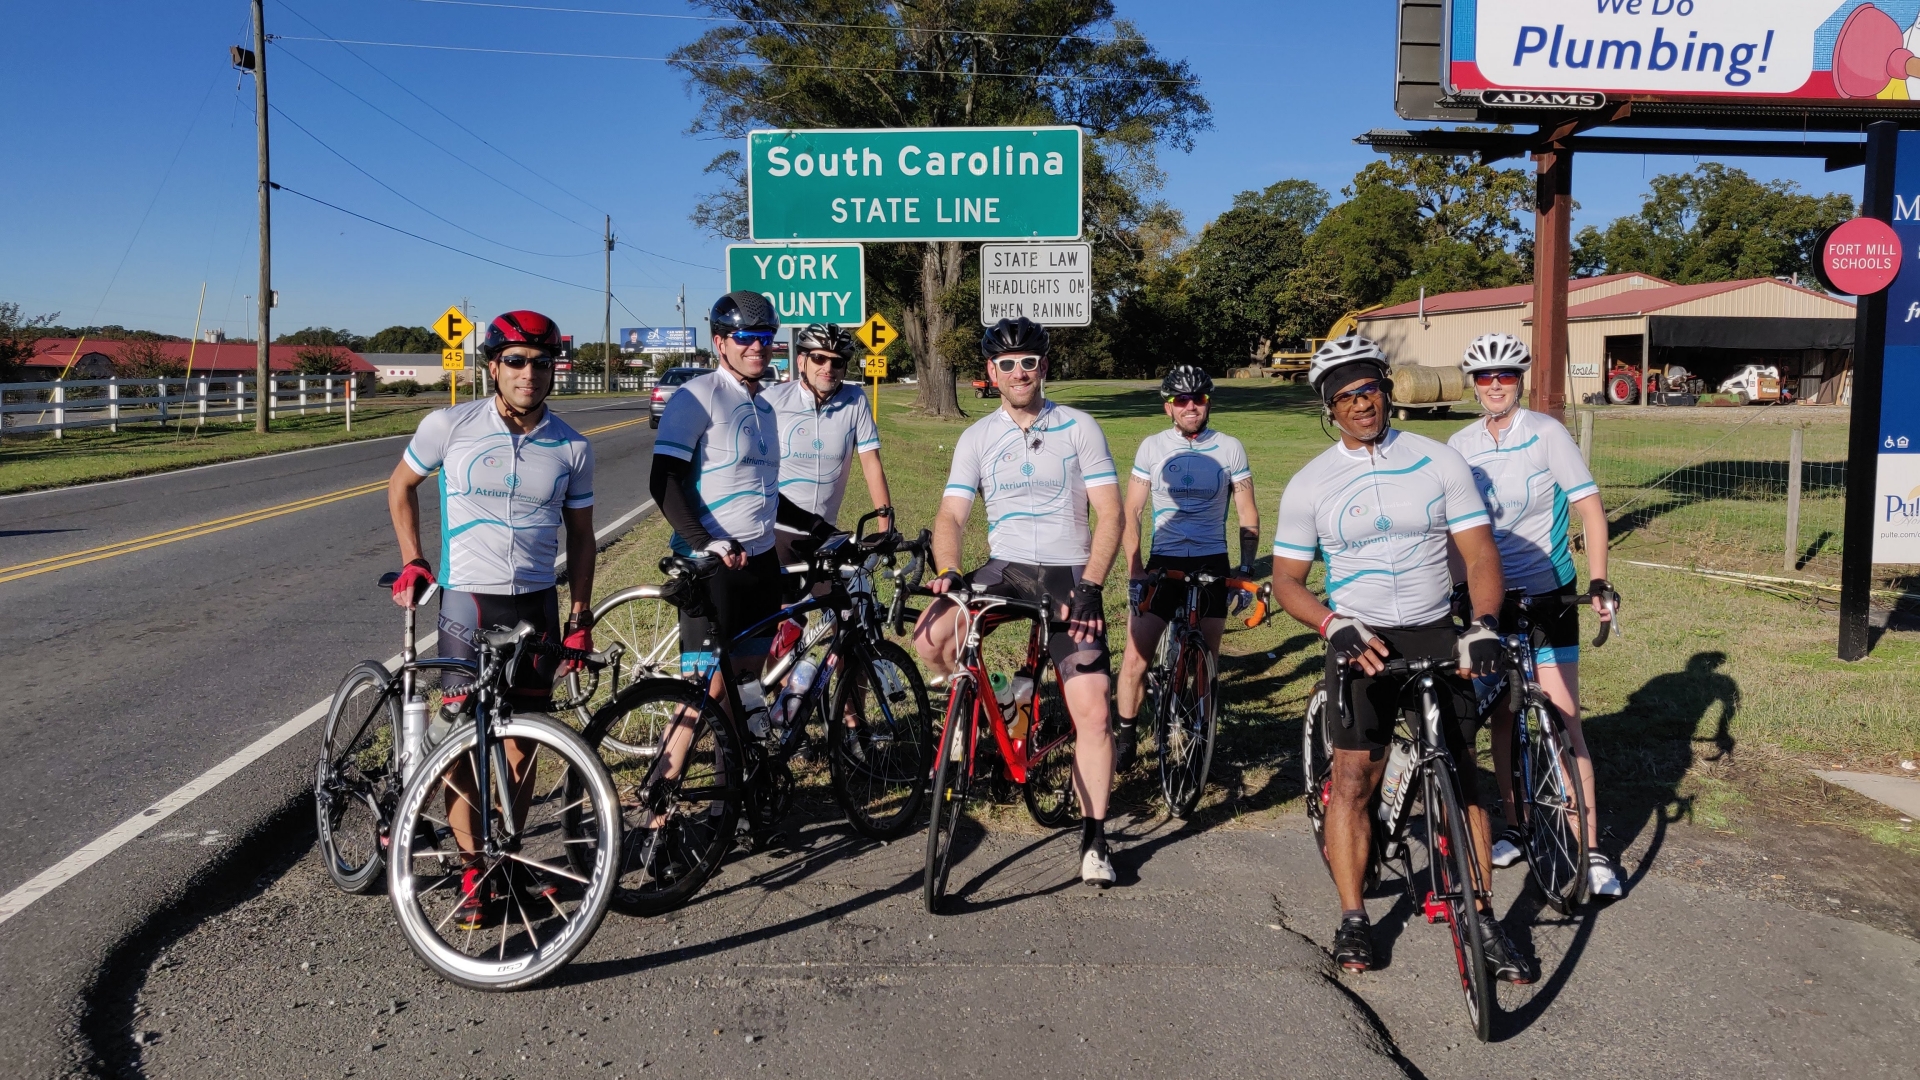 On Monday, October 28, nearly a dozen disabled and able-bodied cyclists, along with five volunteers, from Atrium Health and Navicent Health departed Carolinas Rehabilitation- Charlotte on a journey to Macon, Georgia. 